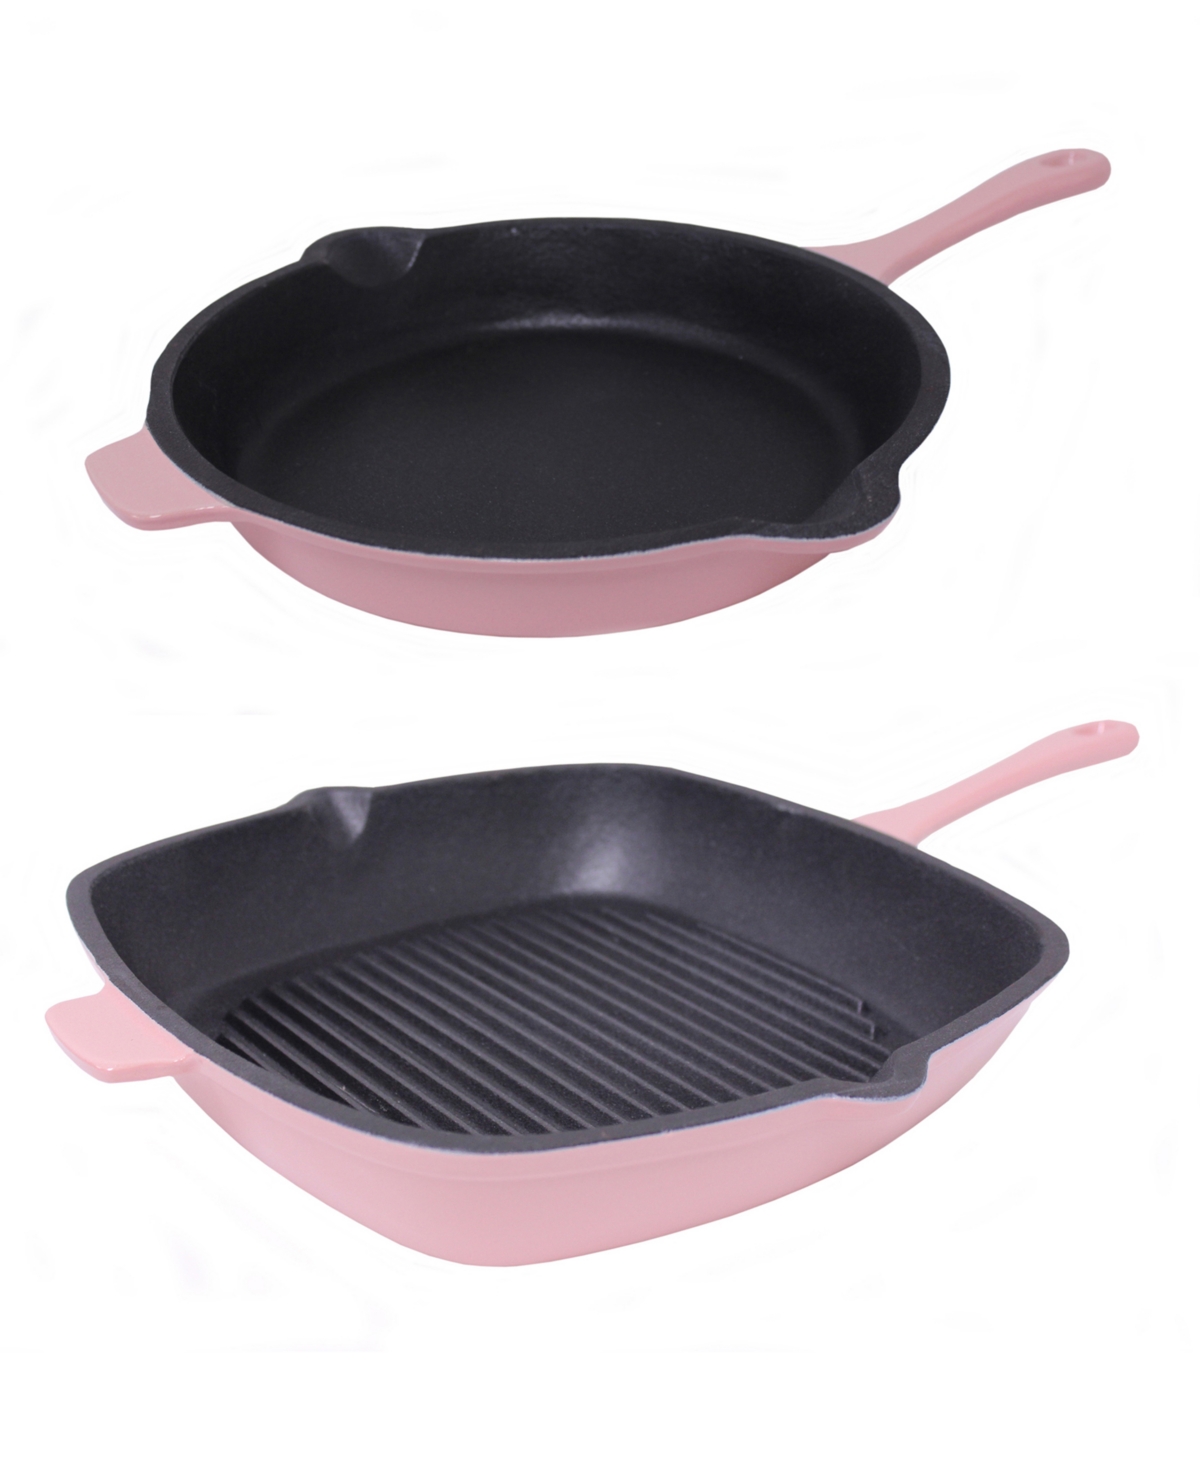 BergHOFF Neo Collection Cast Iron 2-Pc. Cookware Set